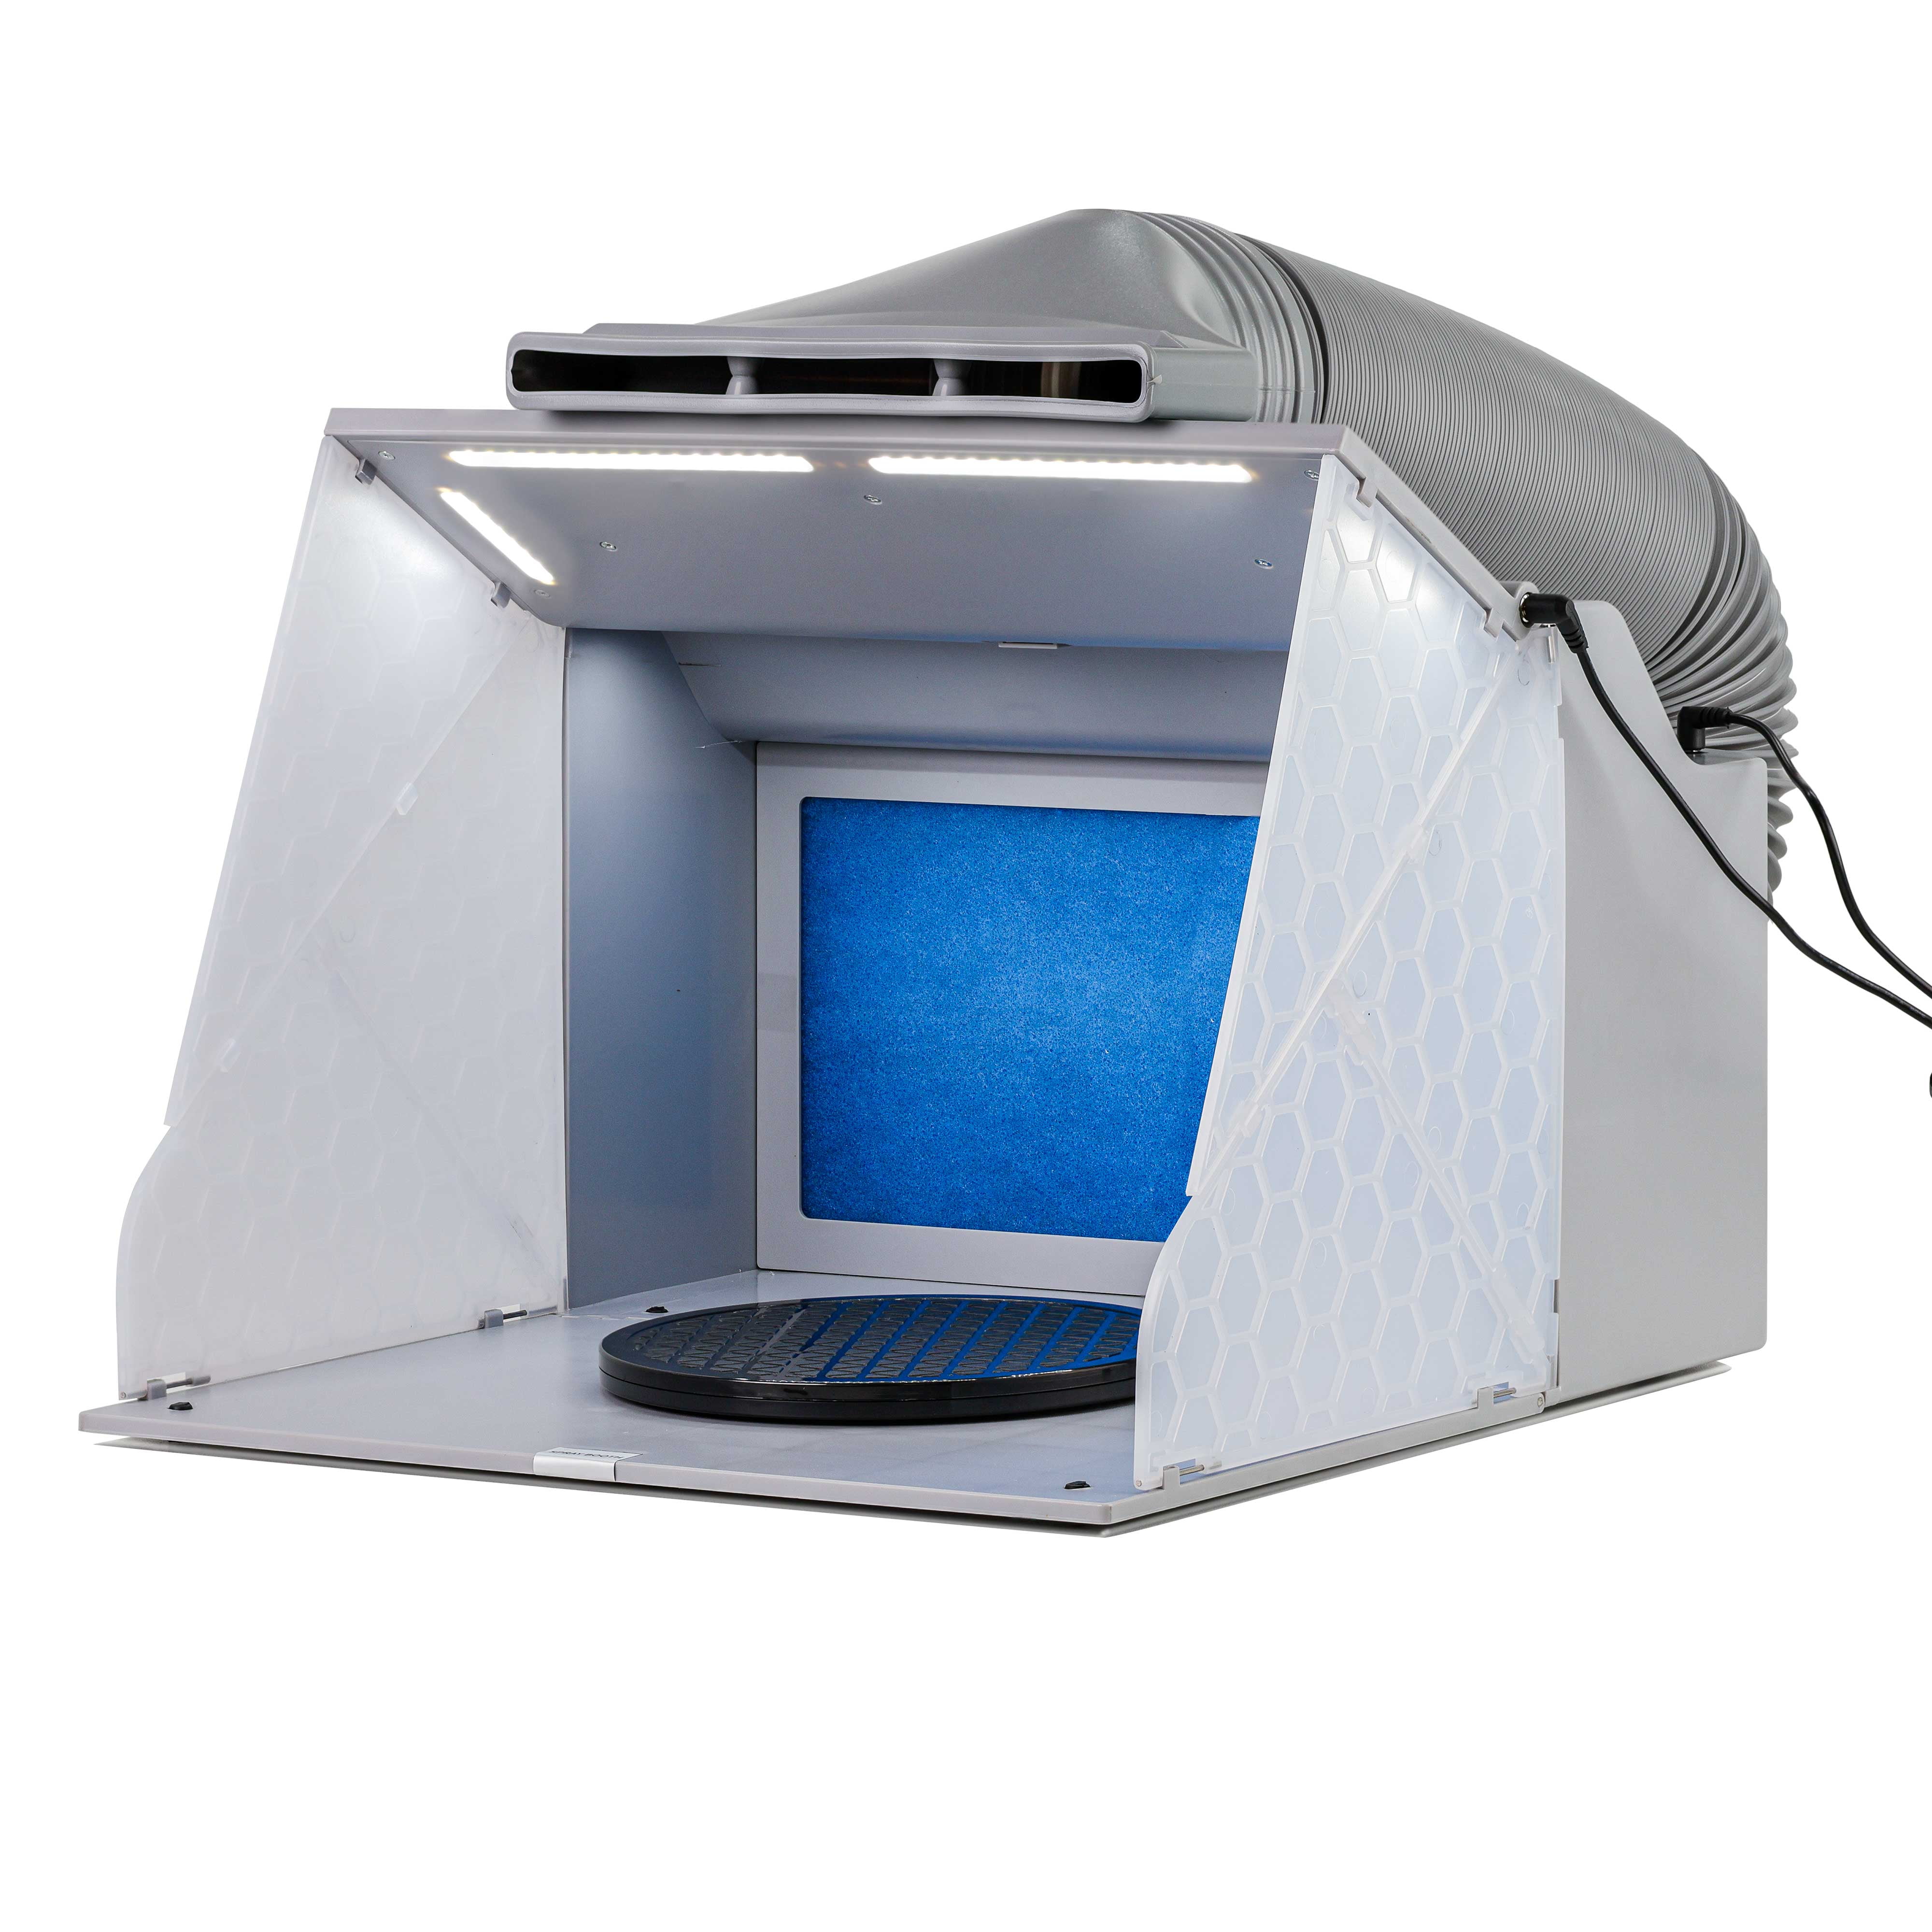 Model Airbrush Spray Booth, Airbrush Paint Booth, Led Light Spray Booth  Kit